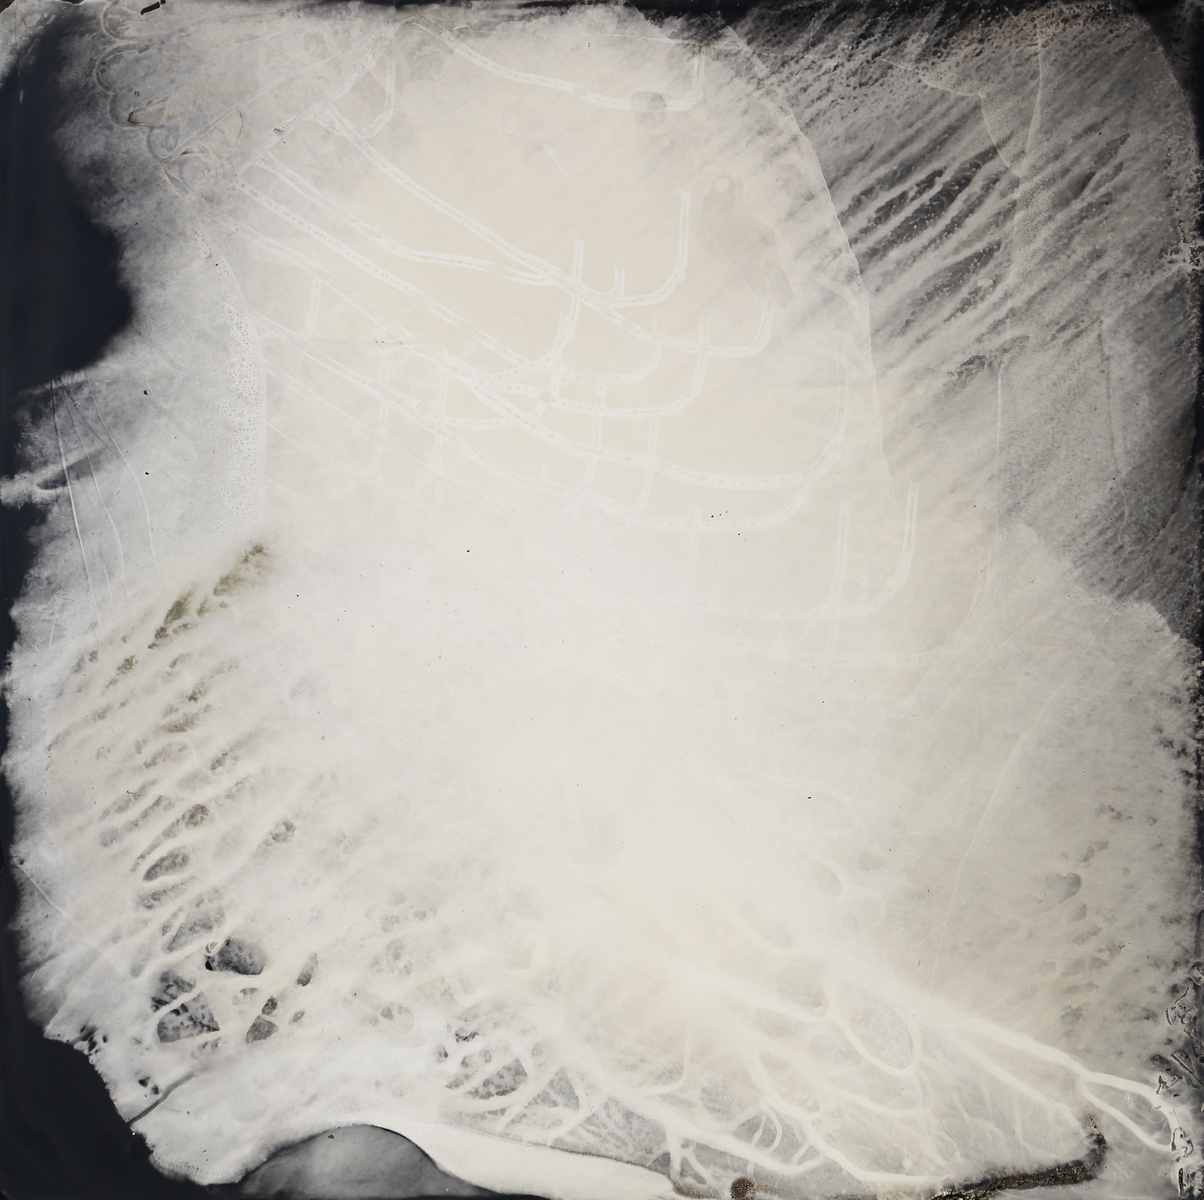 4:50 PM, October 25, 2015. Collodion tintype, 24x24 inches.